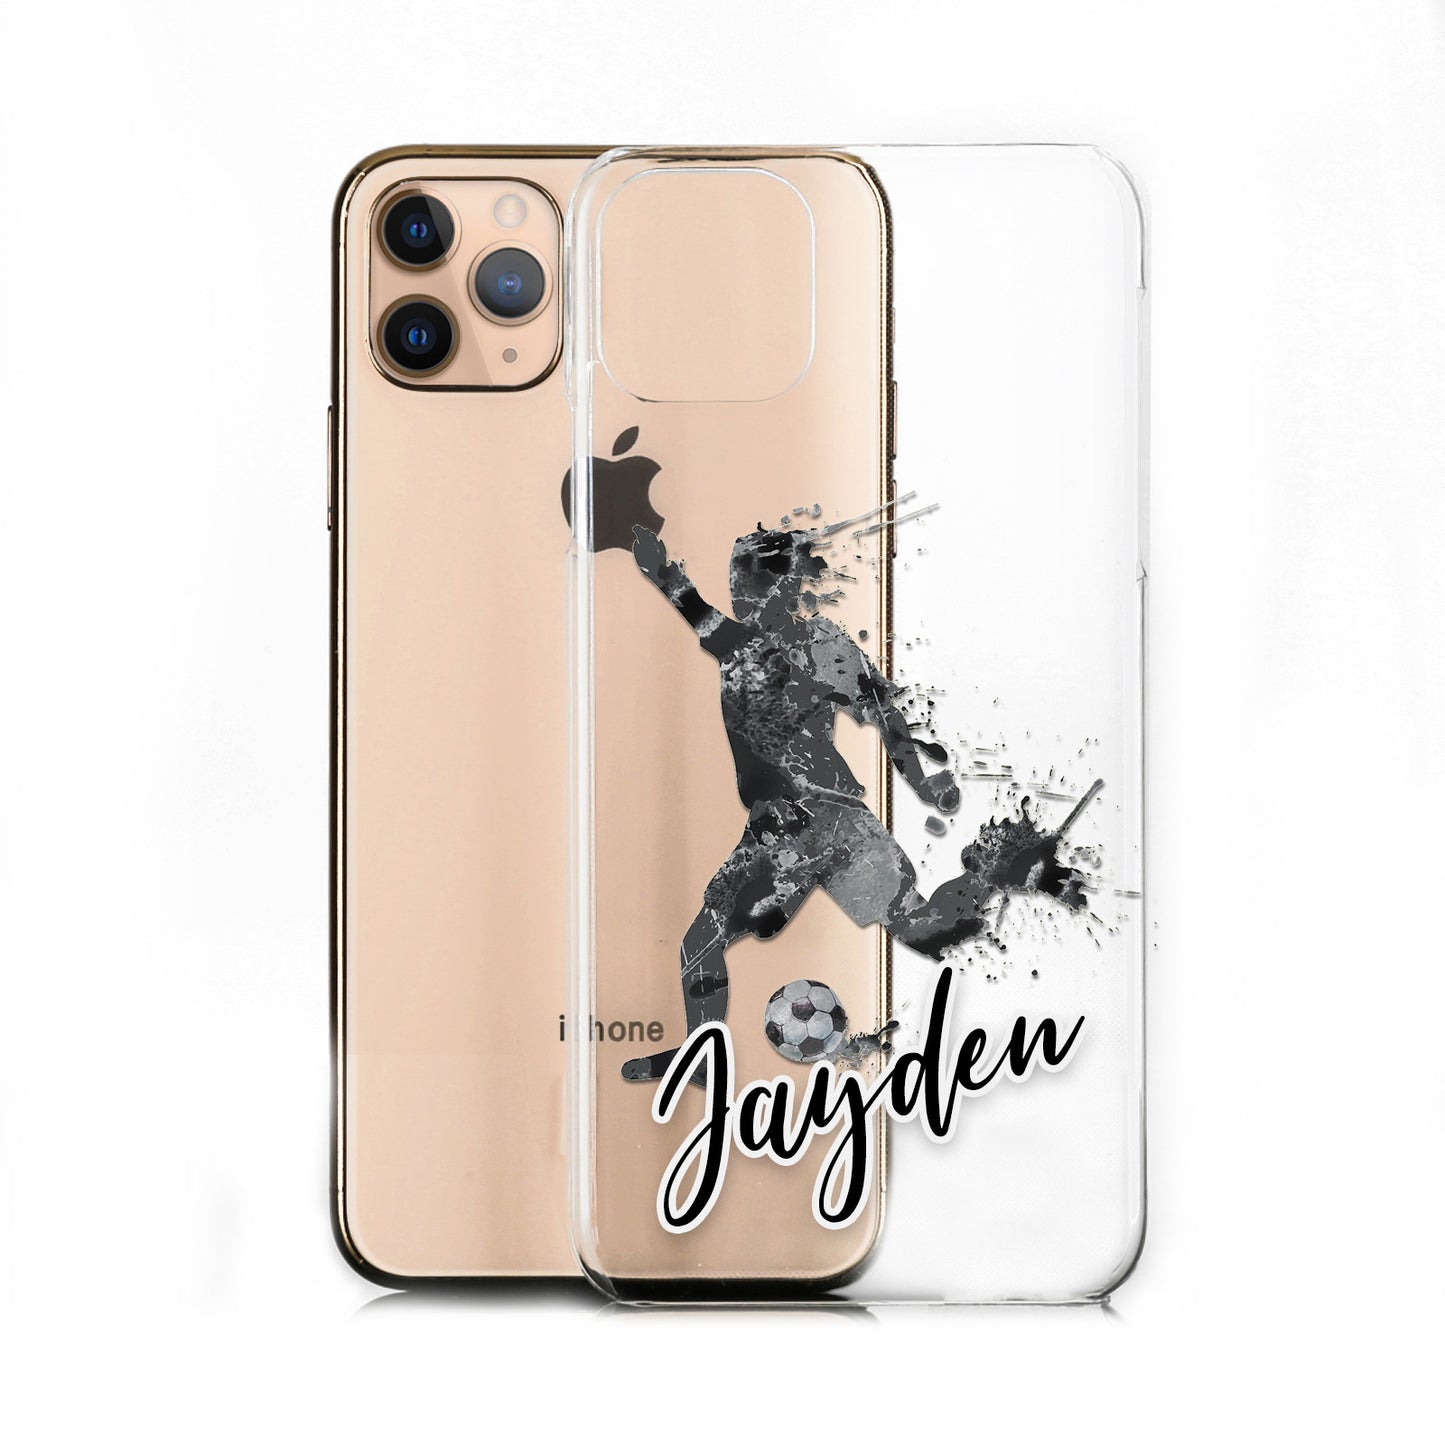 Personalised Sony Phone Hard Case - Ash Grey Football Star with White Outlined Text